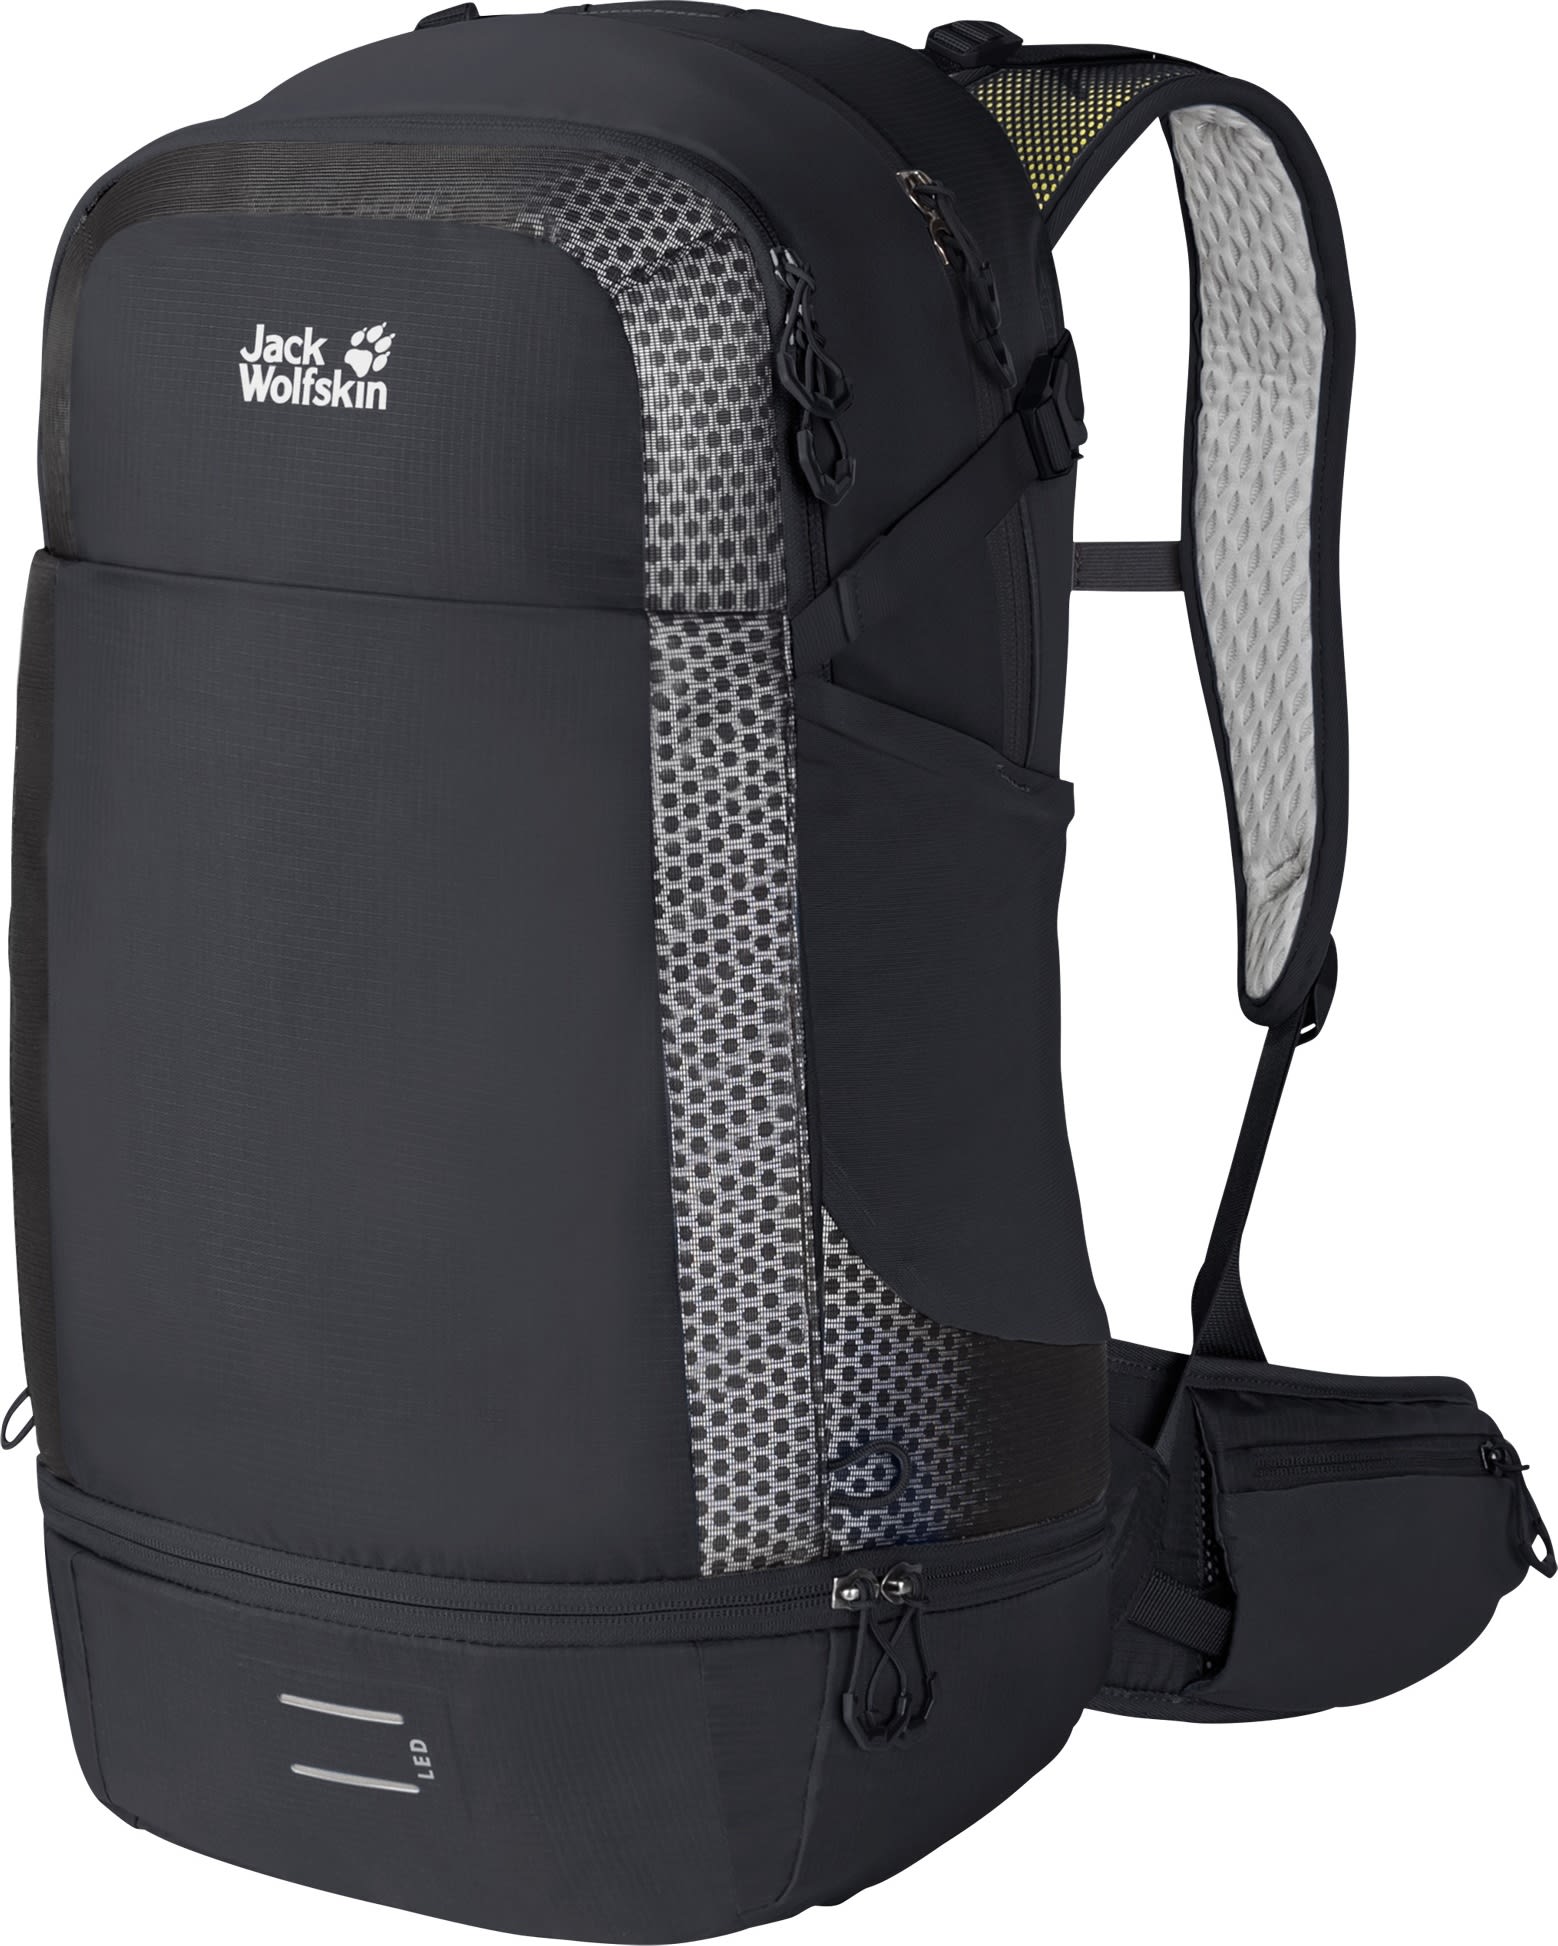 Buy Jack Wolfskin Moab Jam Pro 34.5 from Outnorth